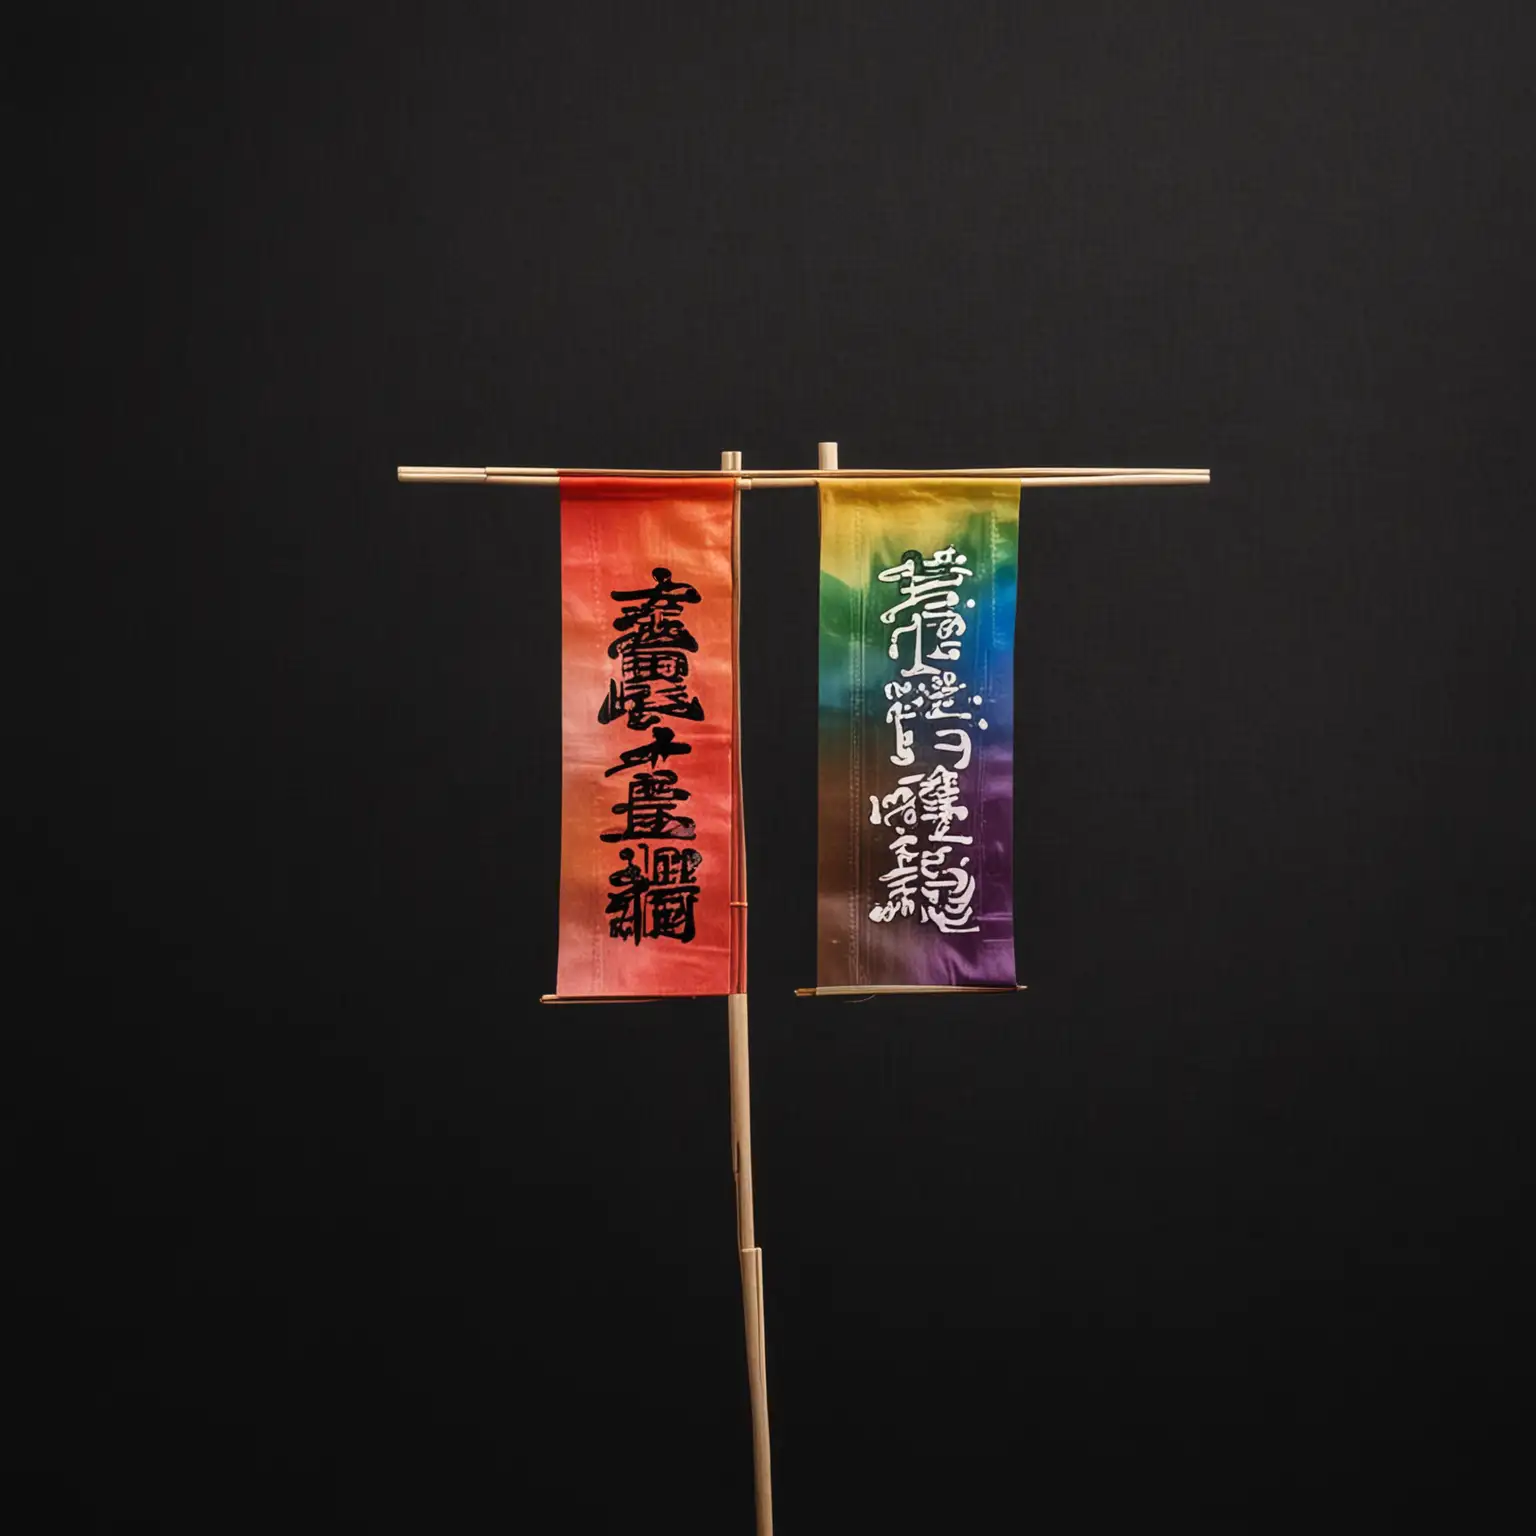 Colorful Japanese Banner with Chinese Characters on Black Background